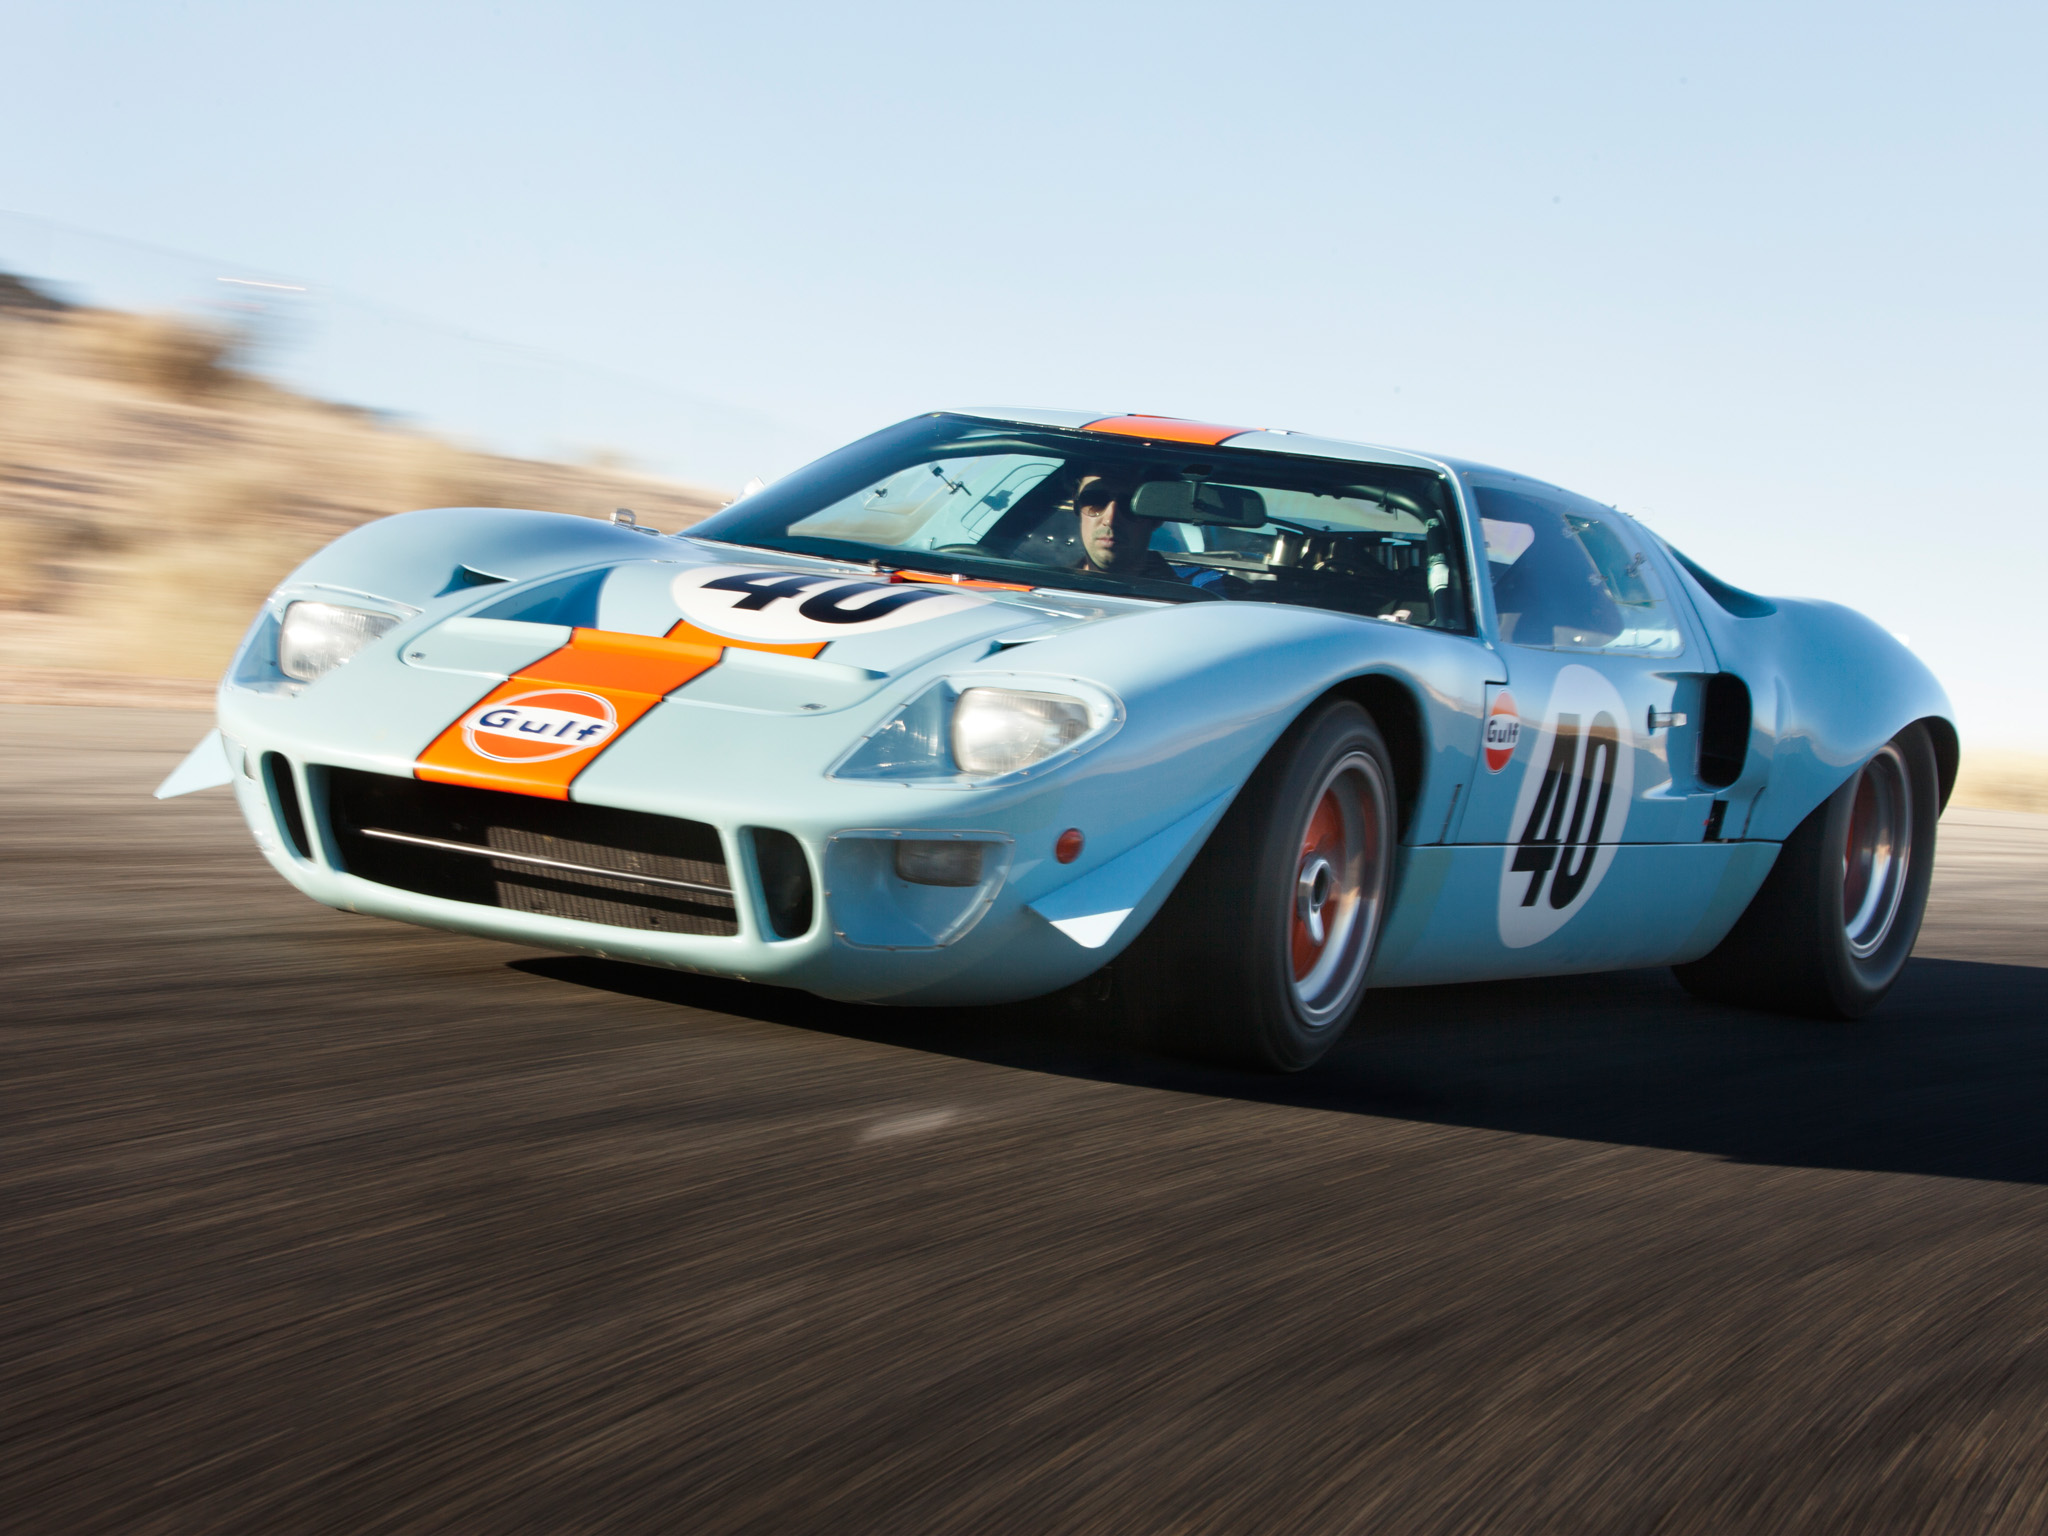 1968, Ford, Gt40, Gulf oil, Le mans, Race, Racing, Supercar, Classic, Vs Wallpaper